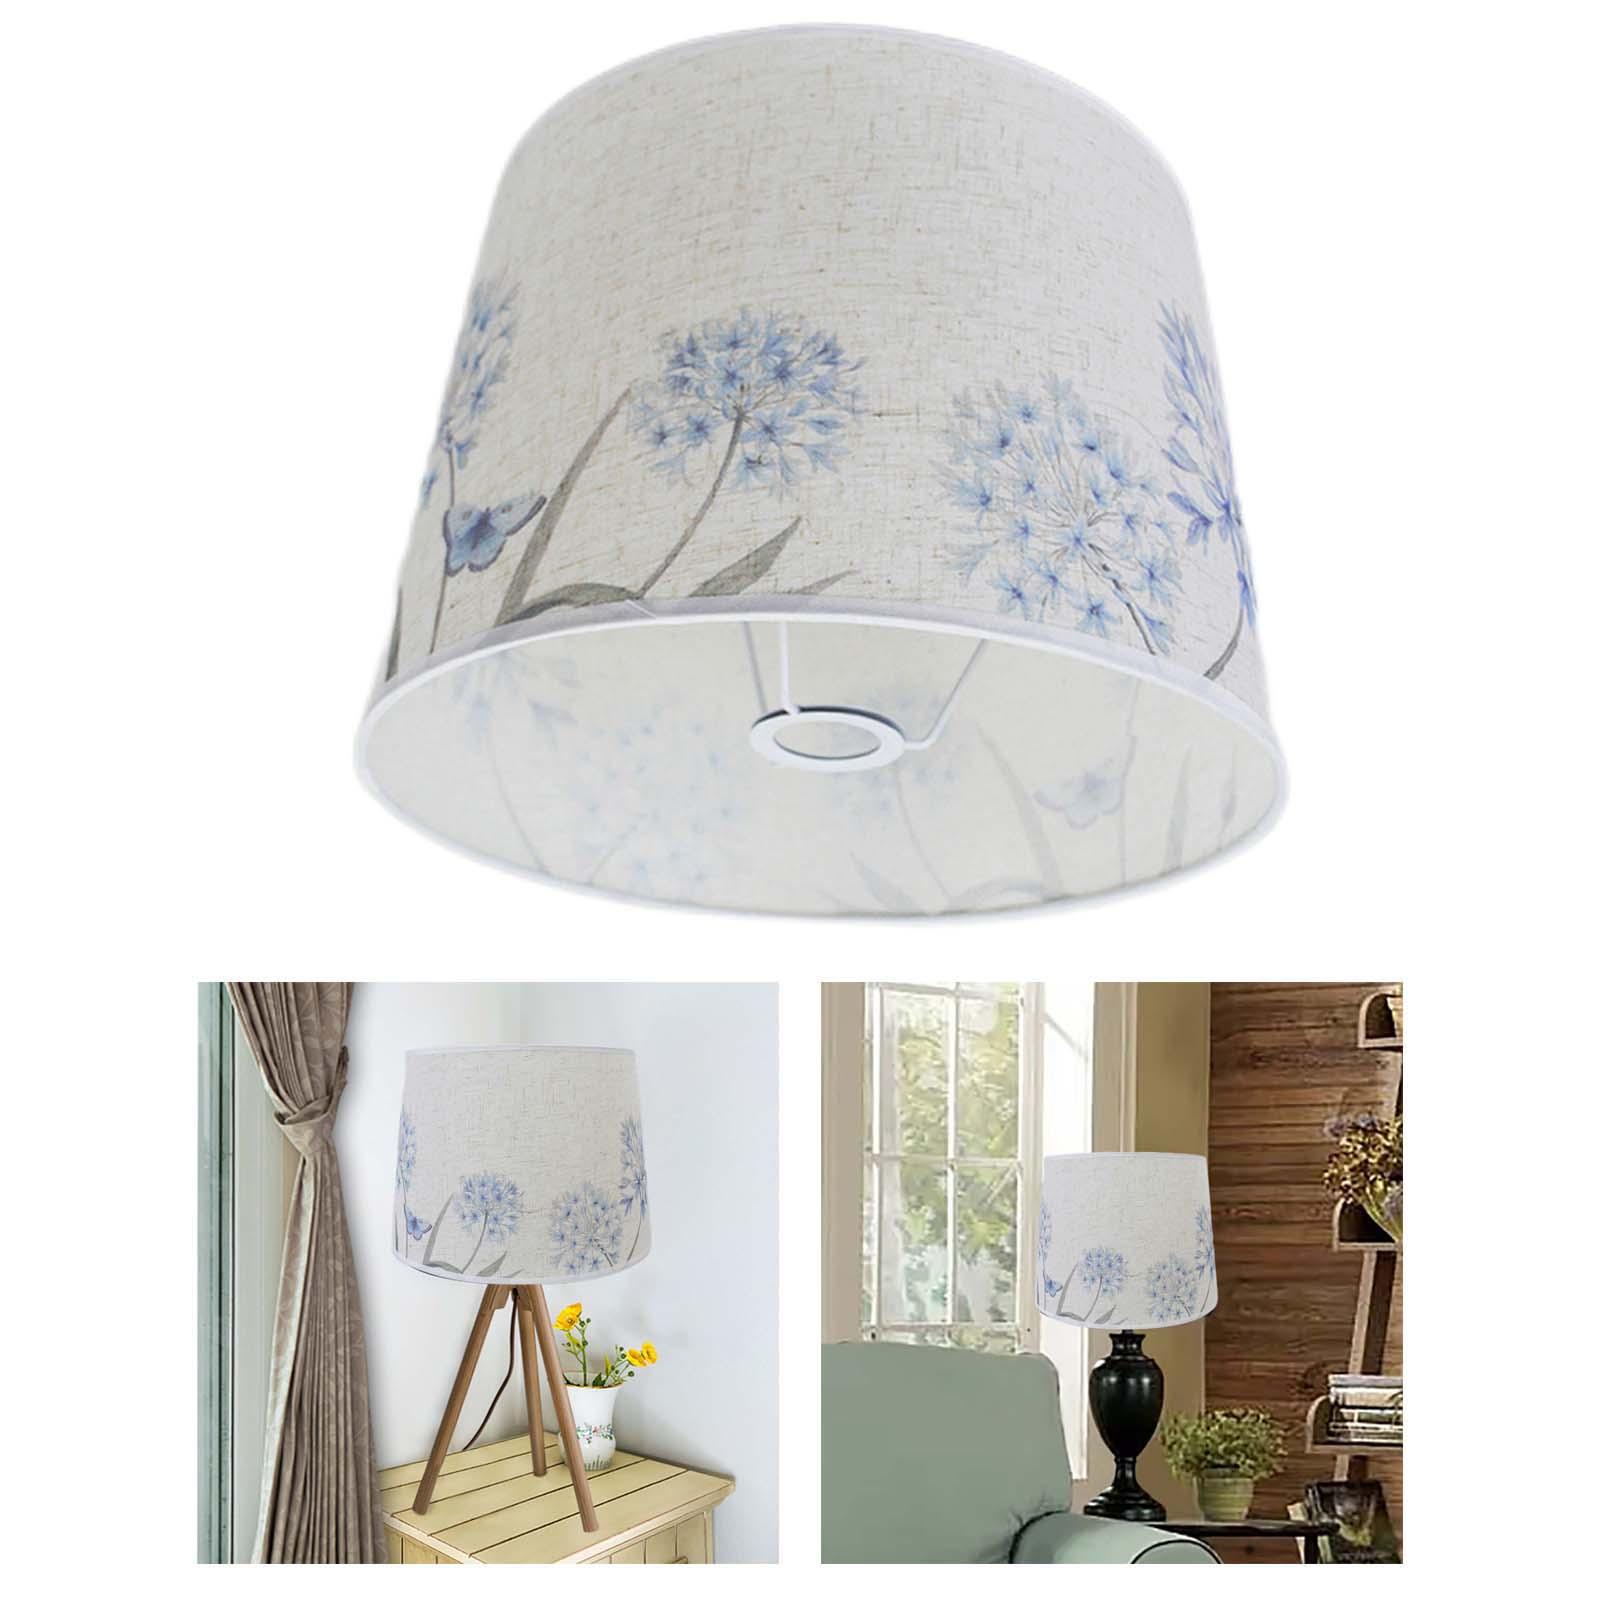 Lampshade Lighting Accessories Lamp Shade Light Cover 6.30x9.45x7.87inch